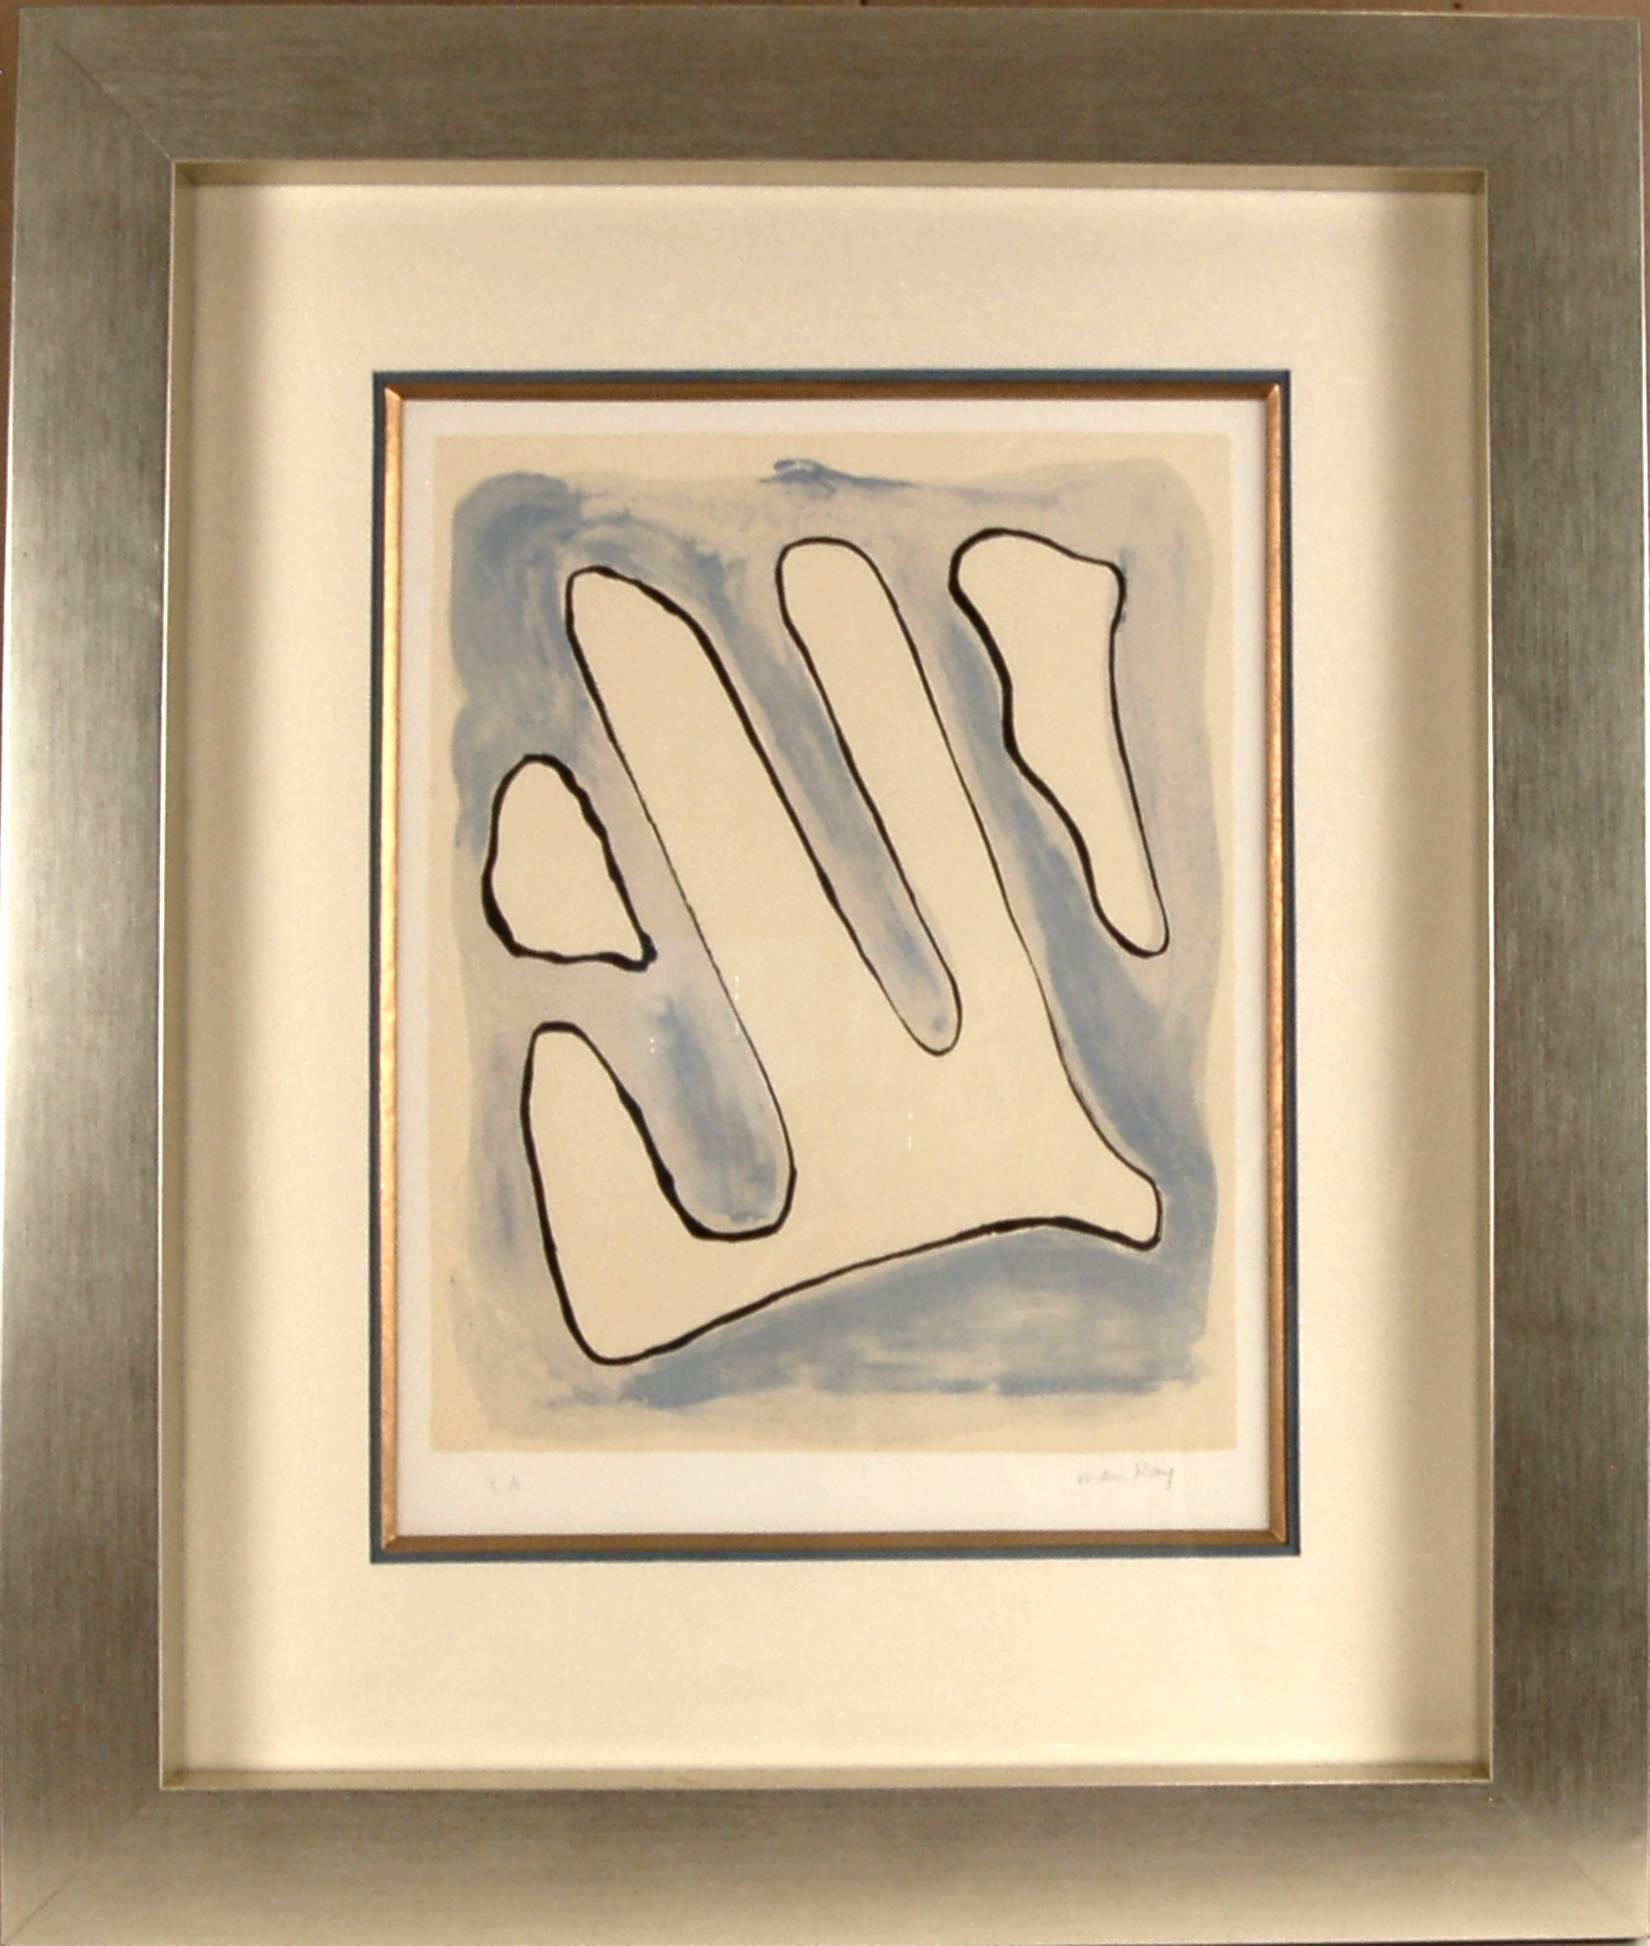 Man Ray Abstract Print - La Main, from the suite Origines Des Especes.